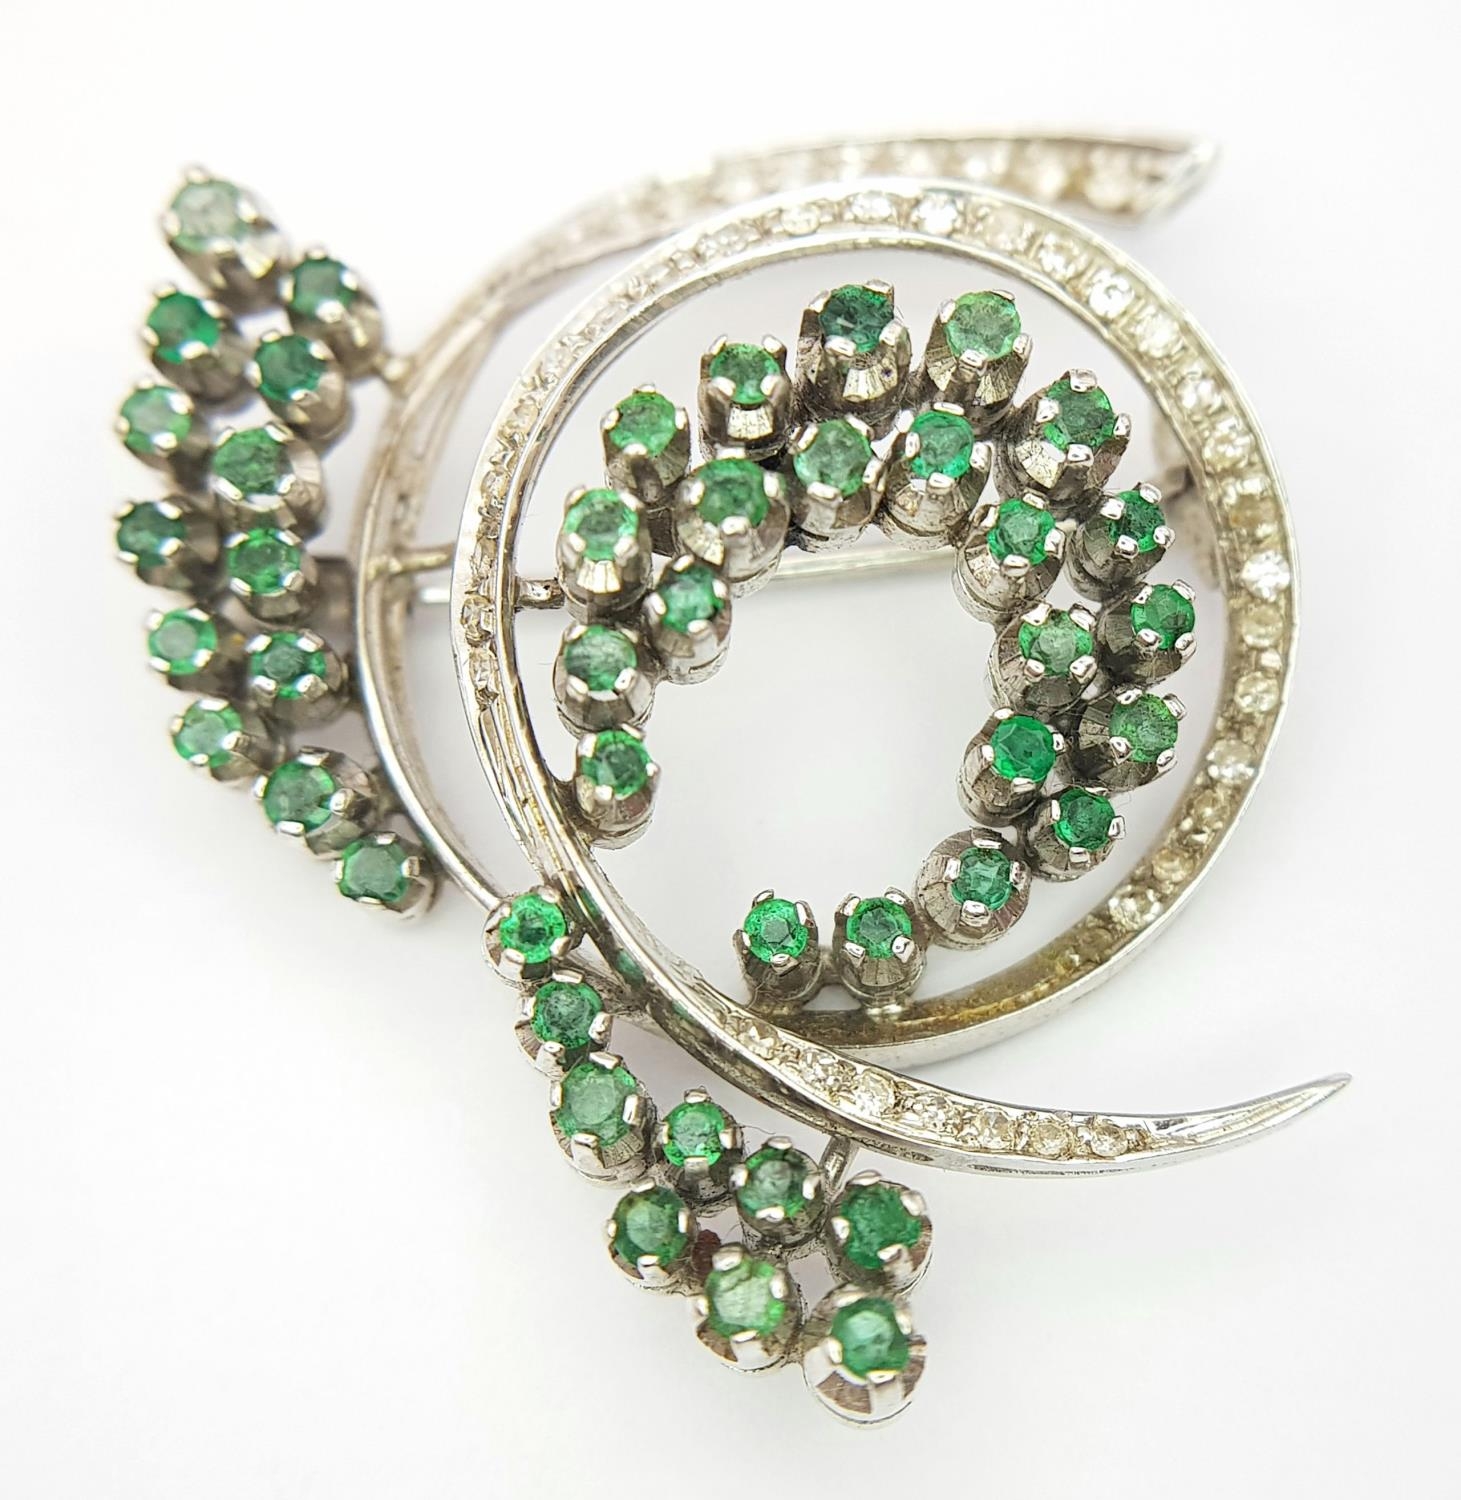 A Beautiful 18K White Gold Emerald and Diamond Swirling Brooch. 2ctw of round cut emeralds and